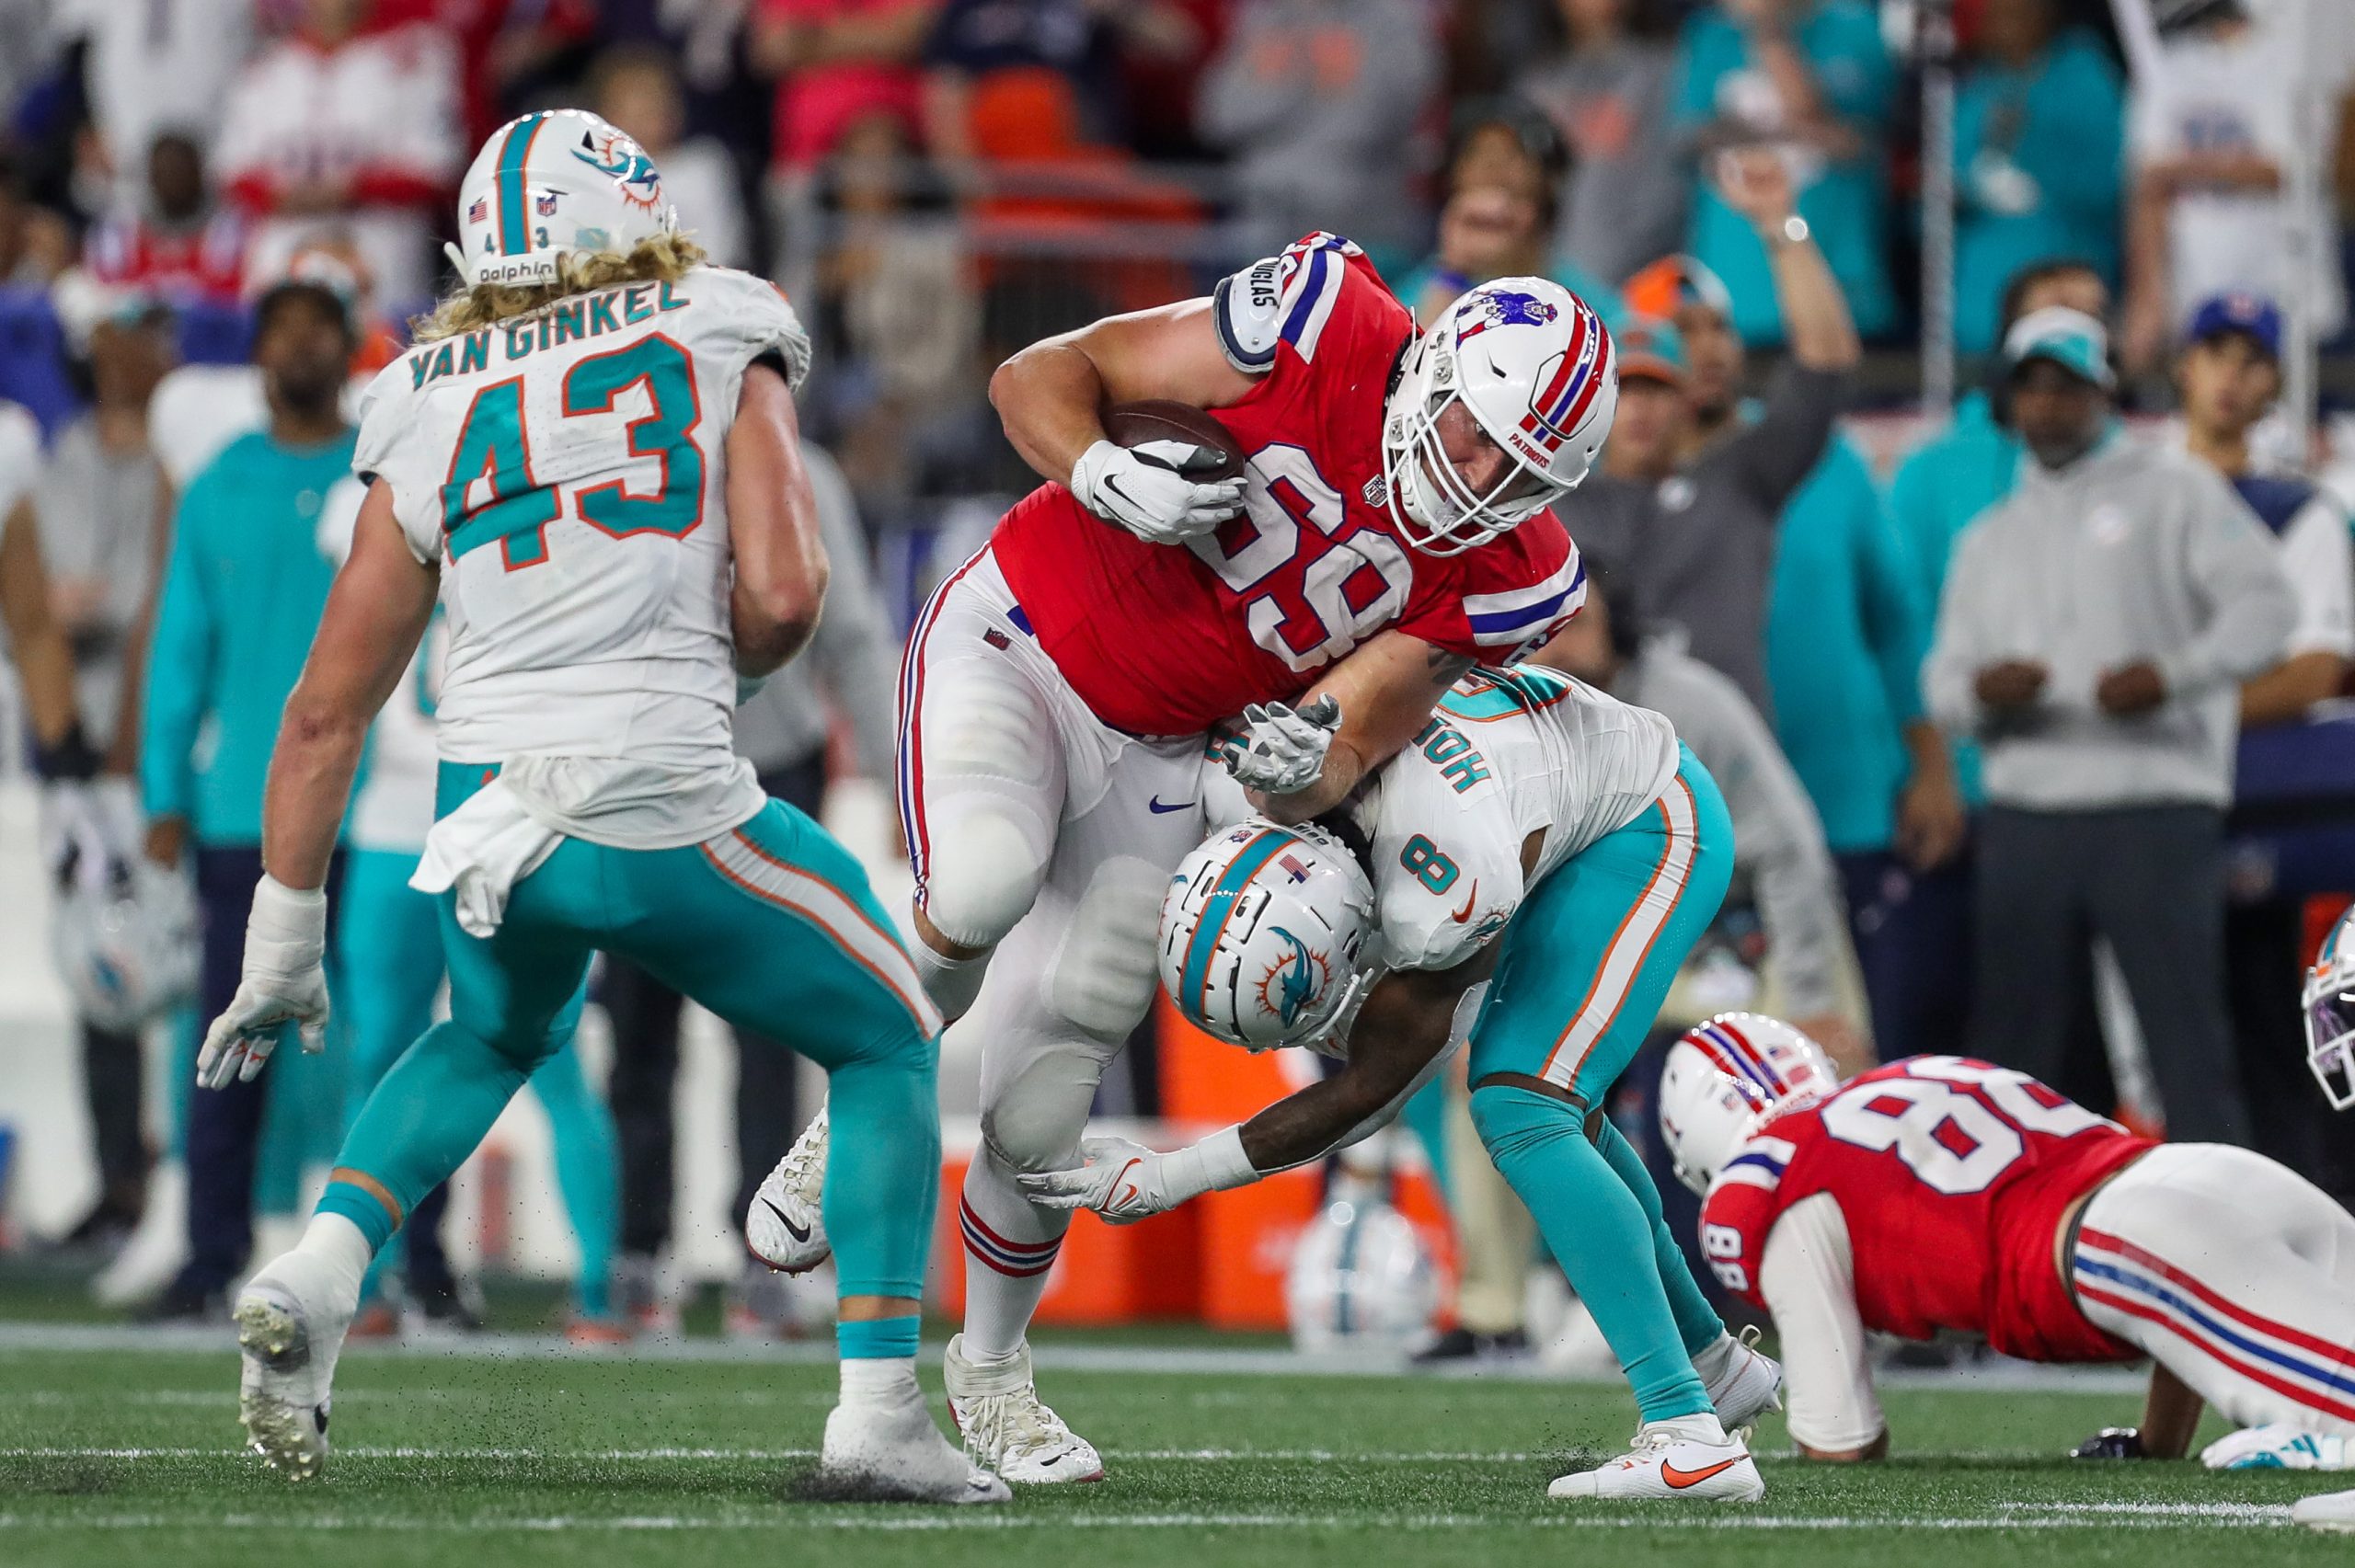 Patriots guard Cole Strange's efforts to keep his team's chances alive against the Dolphins on Sunday were great but fell just short. Photo Credit: Paul Rutherford-USA TODAY Sports